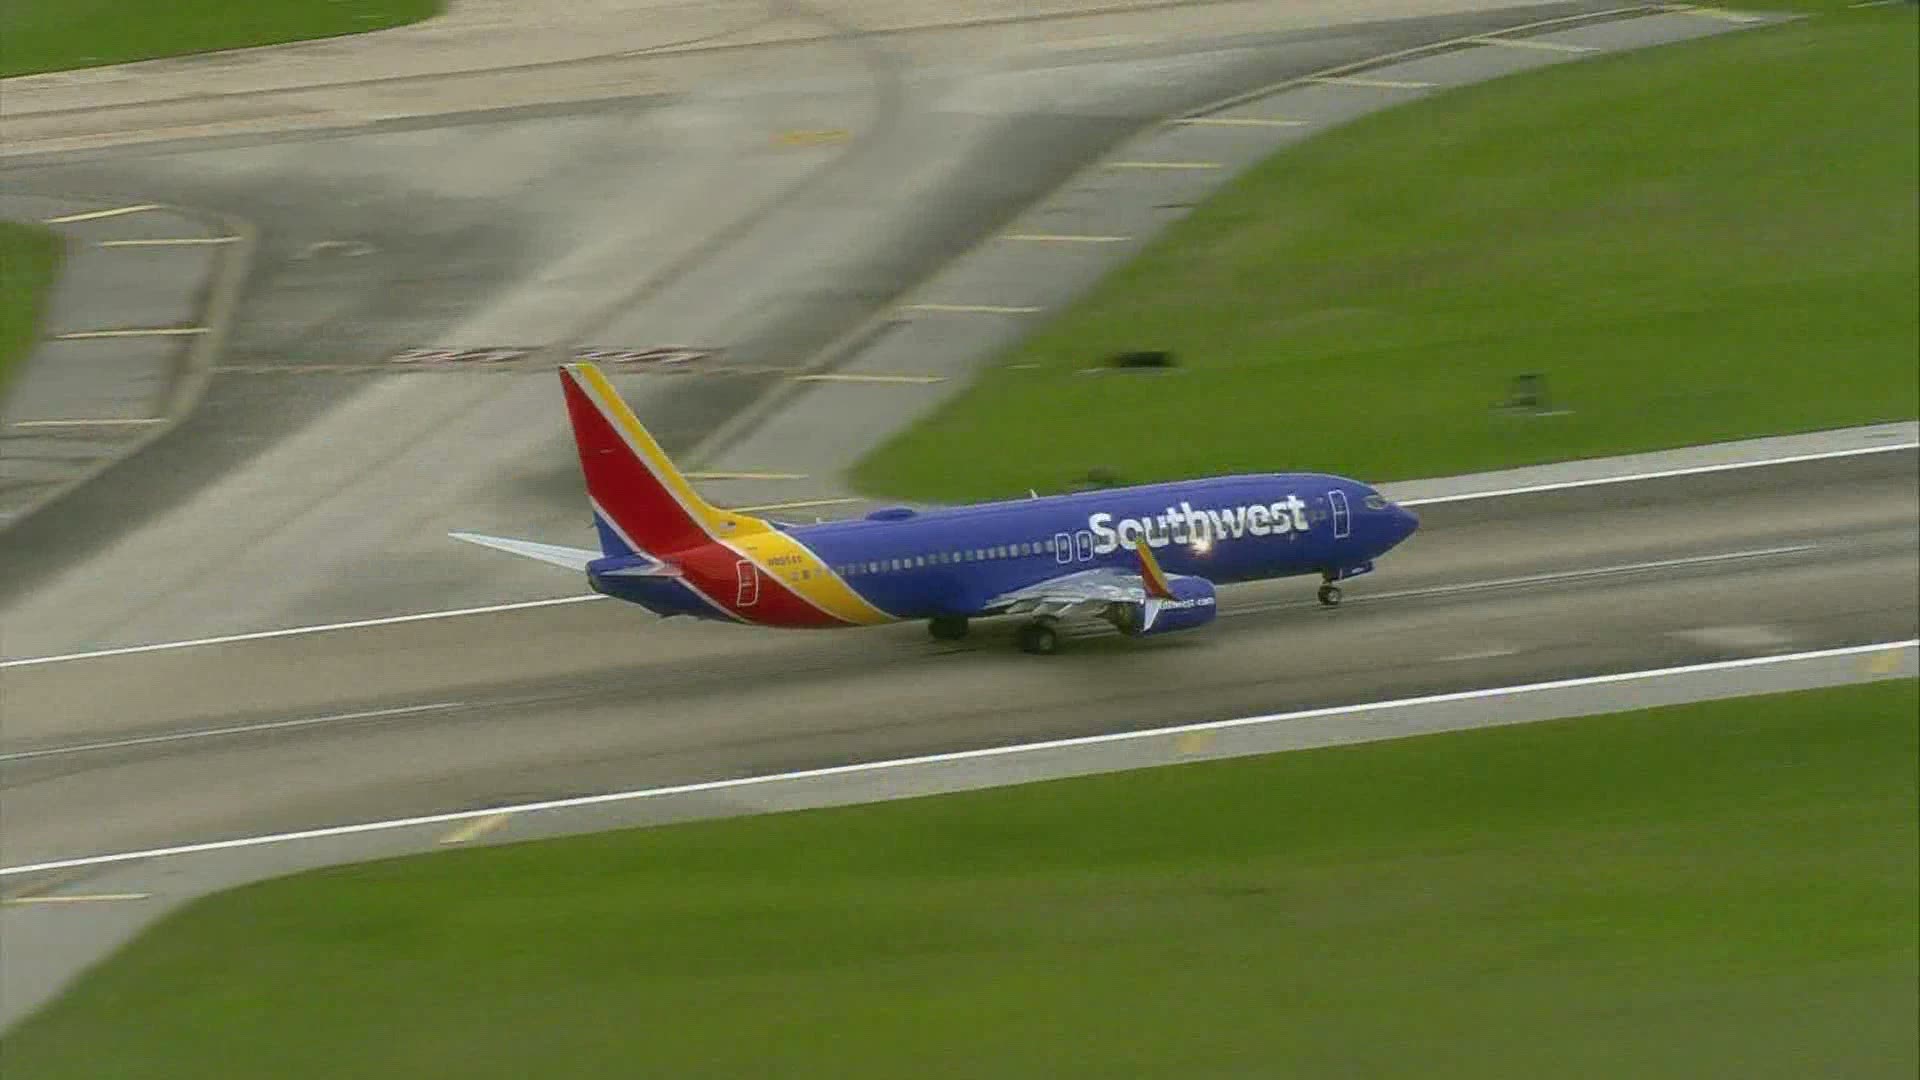 Southwest Airlines is back at Bush Intercontinental Airport. Monday was the first day a Southwest Airlines plane flew into IAH in 16 years.